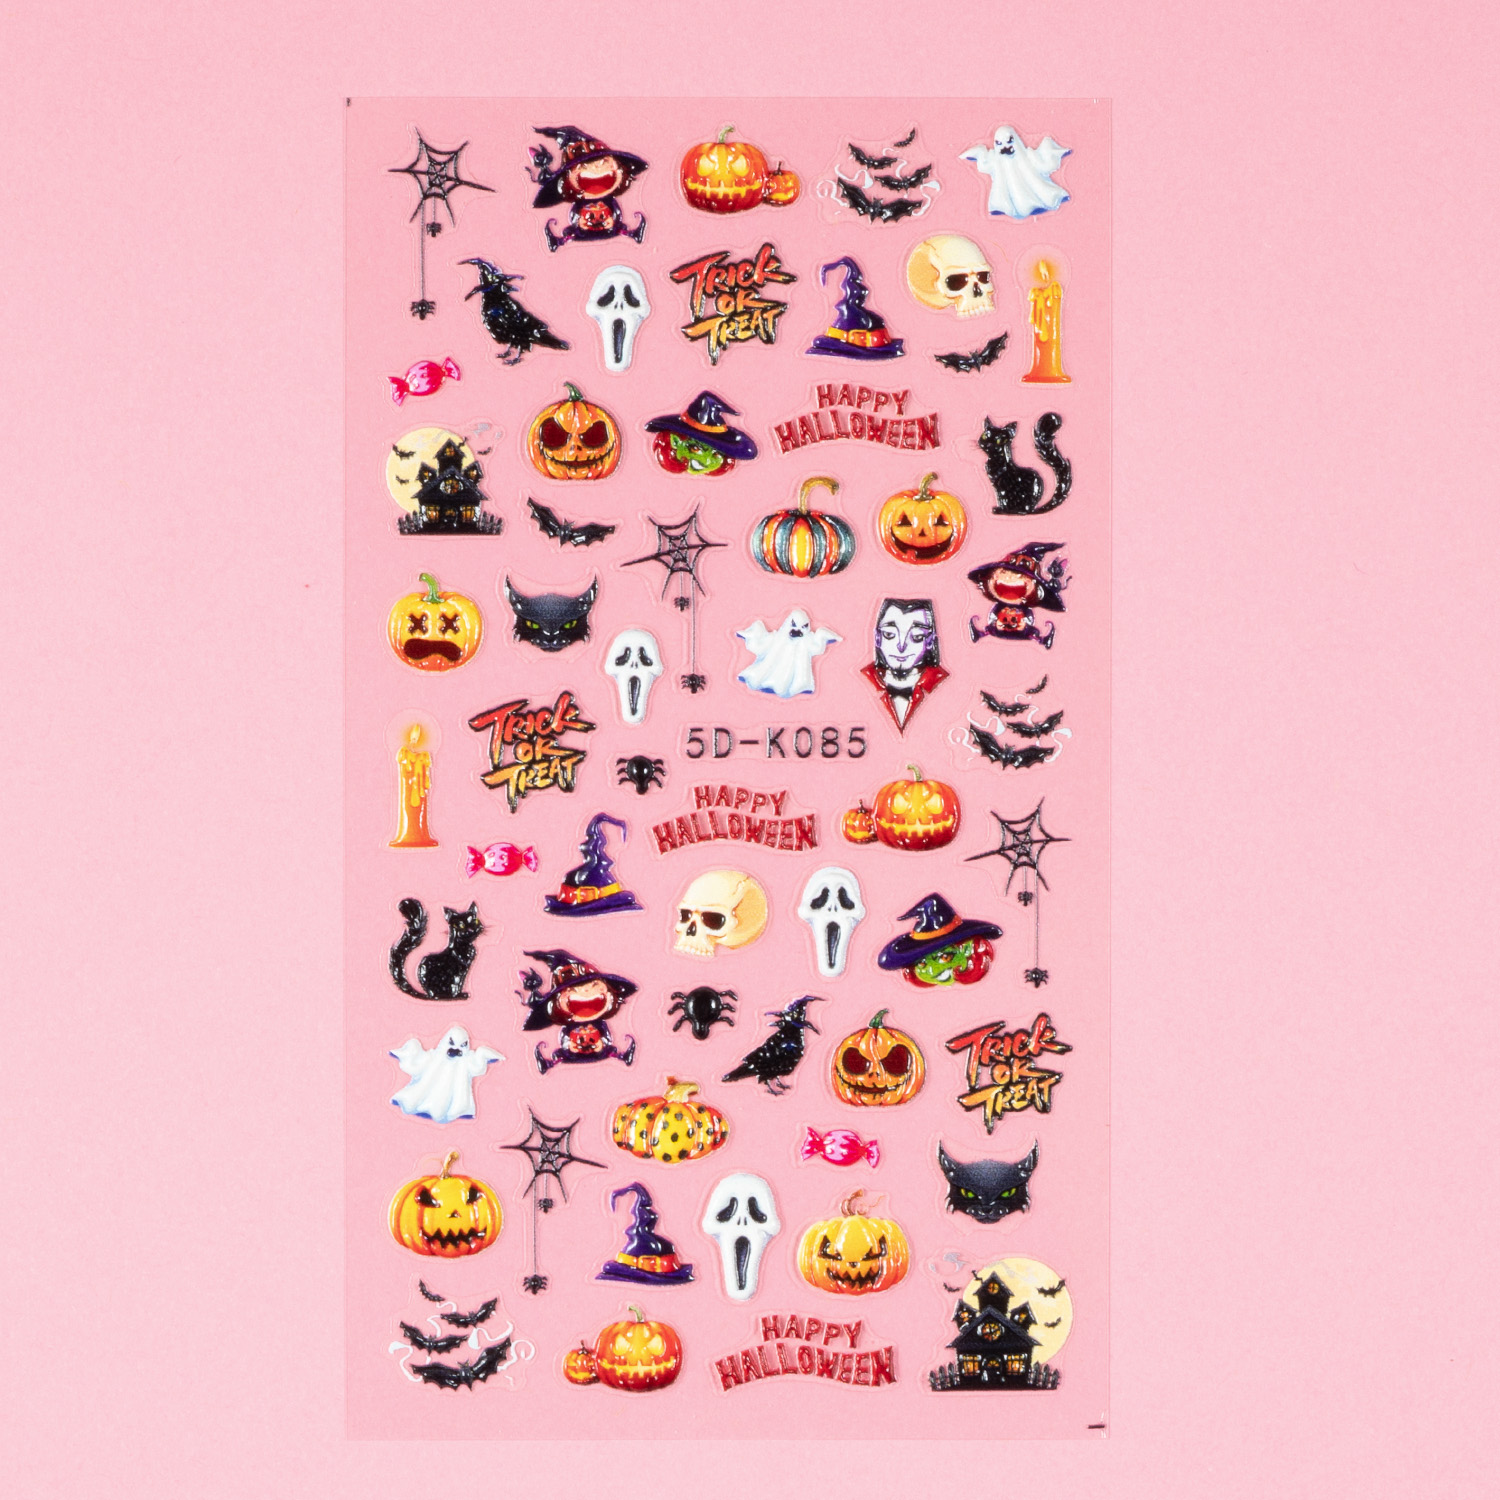 TRICK OR TREAT HALLOWEEN STICKERS